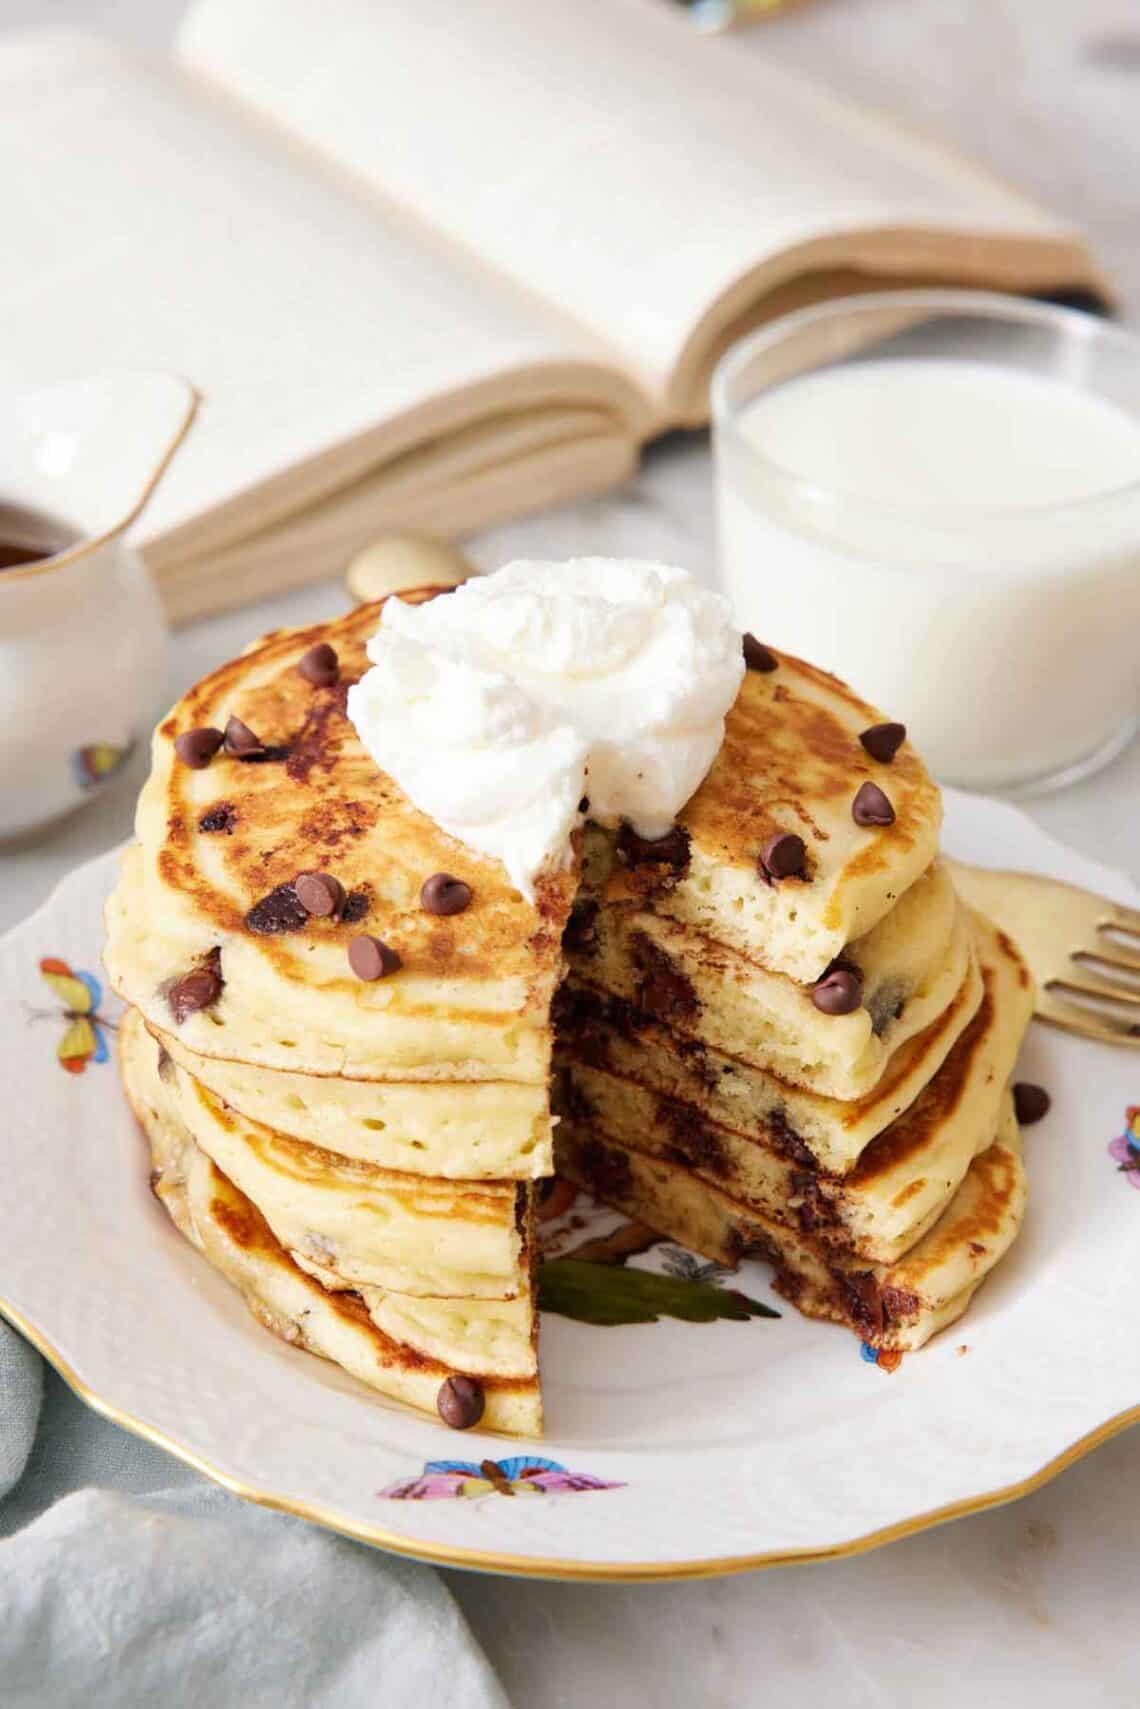 A stack of cut chocolate chip pancakes with whipped cream on top with a glass of milk and opened book in the back.